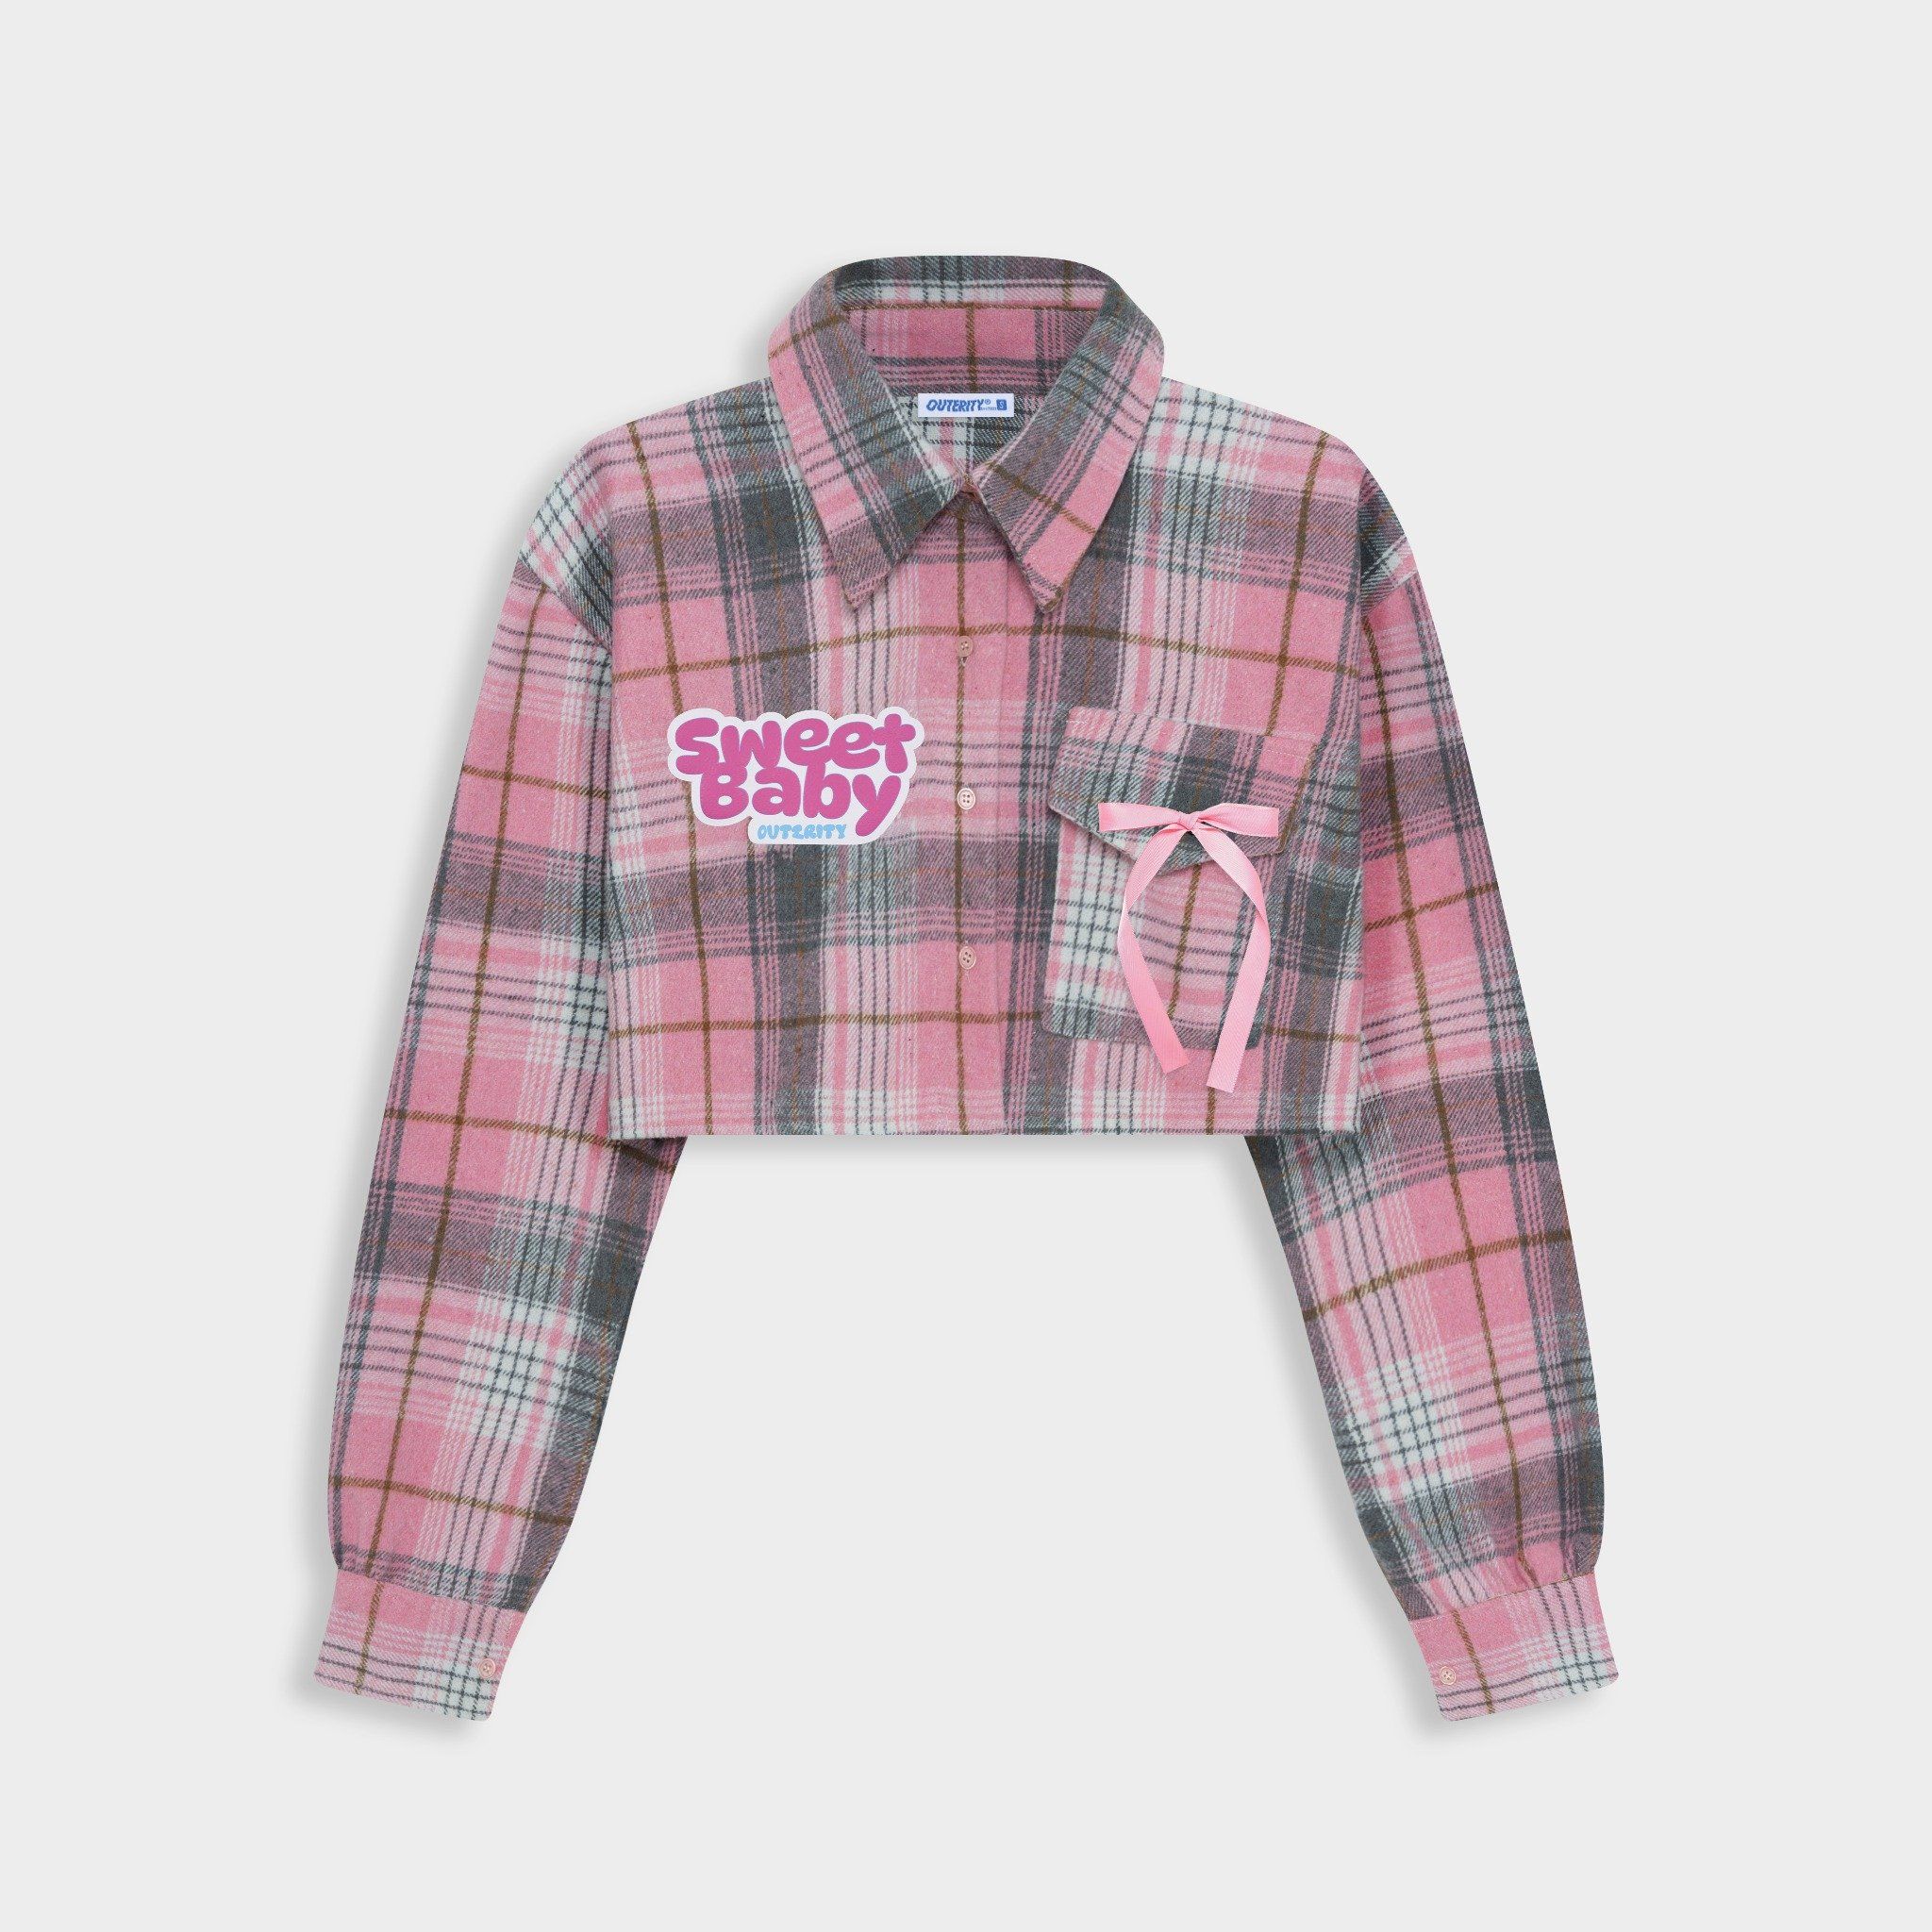  Áo Flannel Outerity SweetBaby / BabyPink 